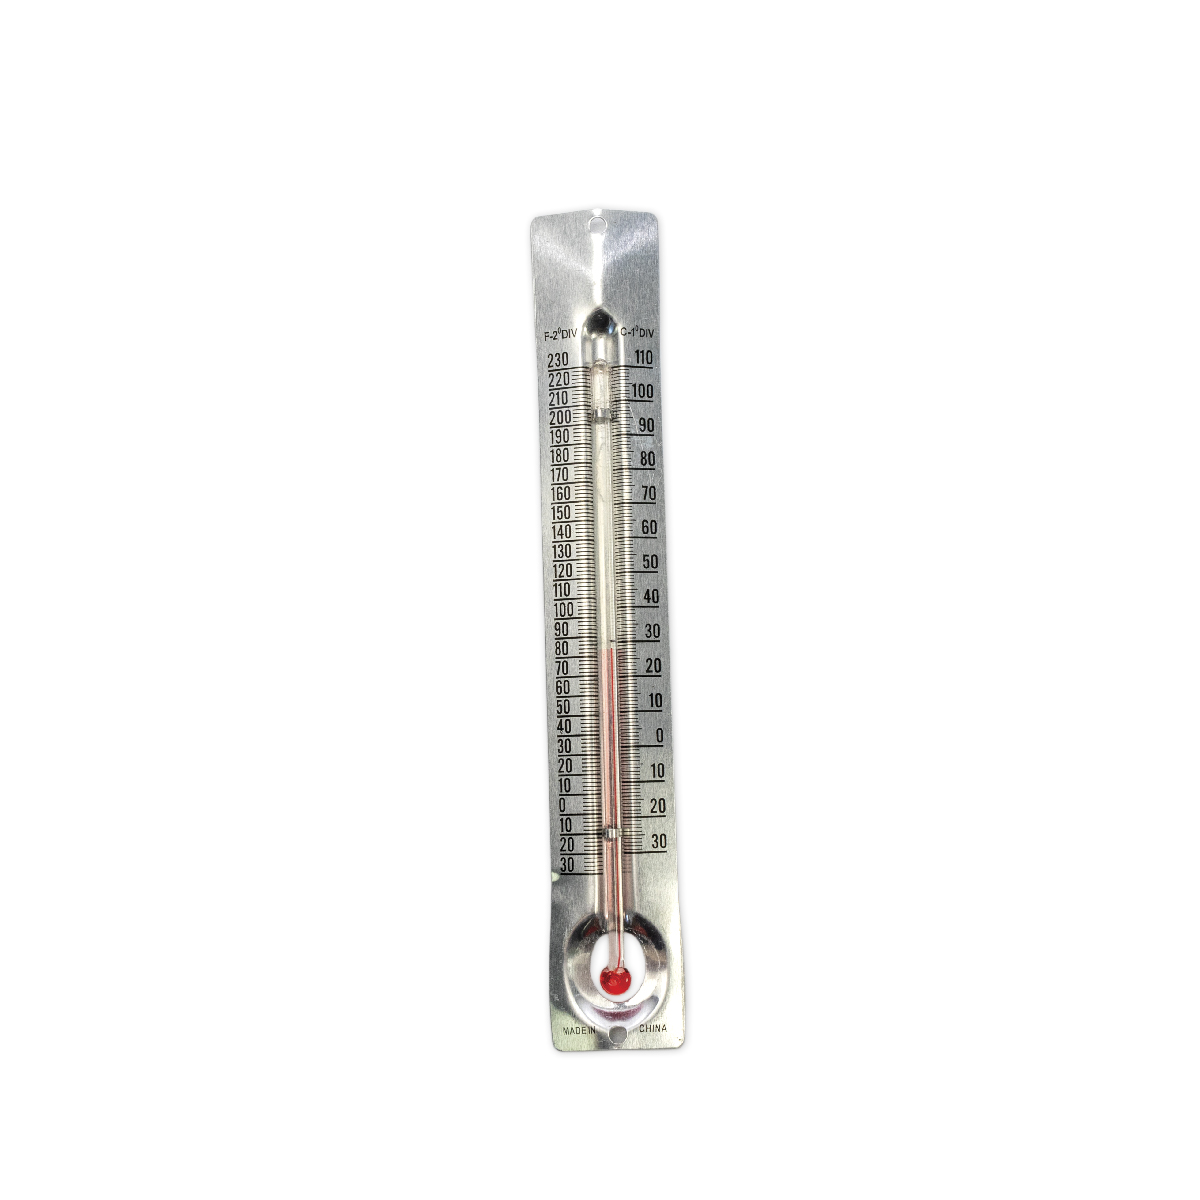 What is a Room Thermometer? – PVL